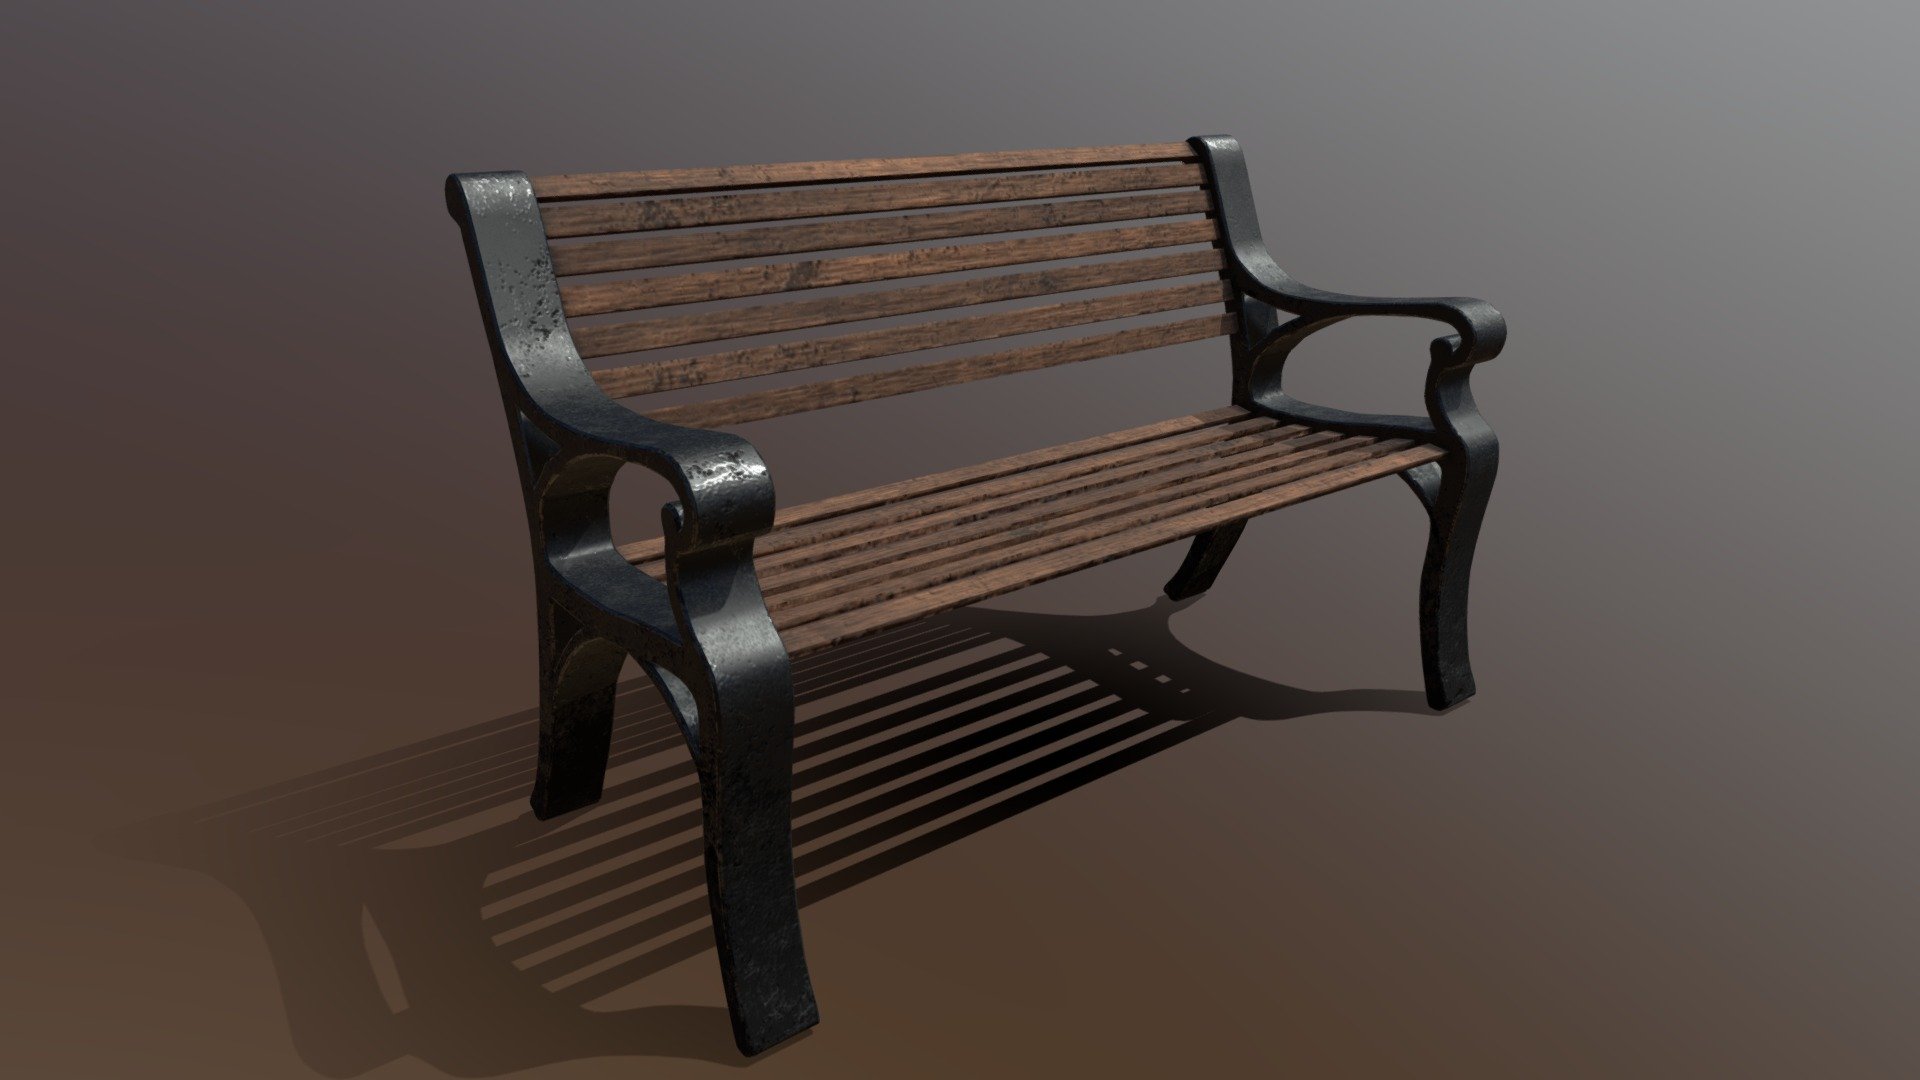 An iron wrought bench one might find in an upscale park or garden 3d model